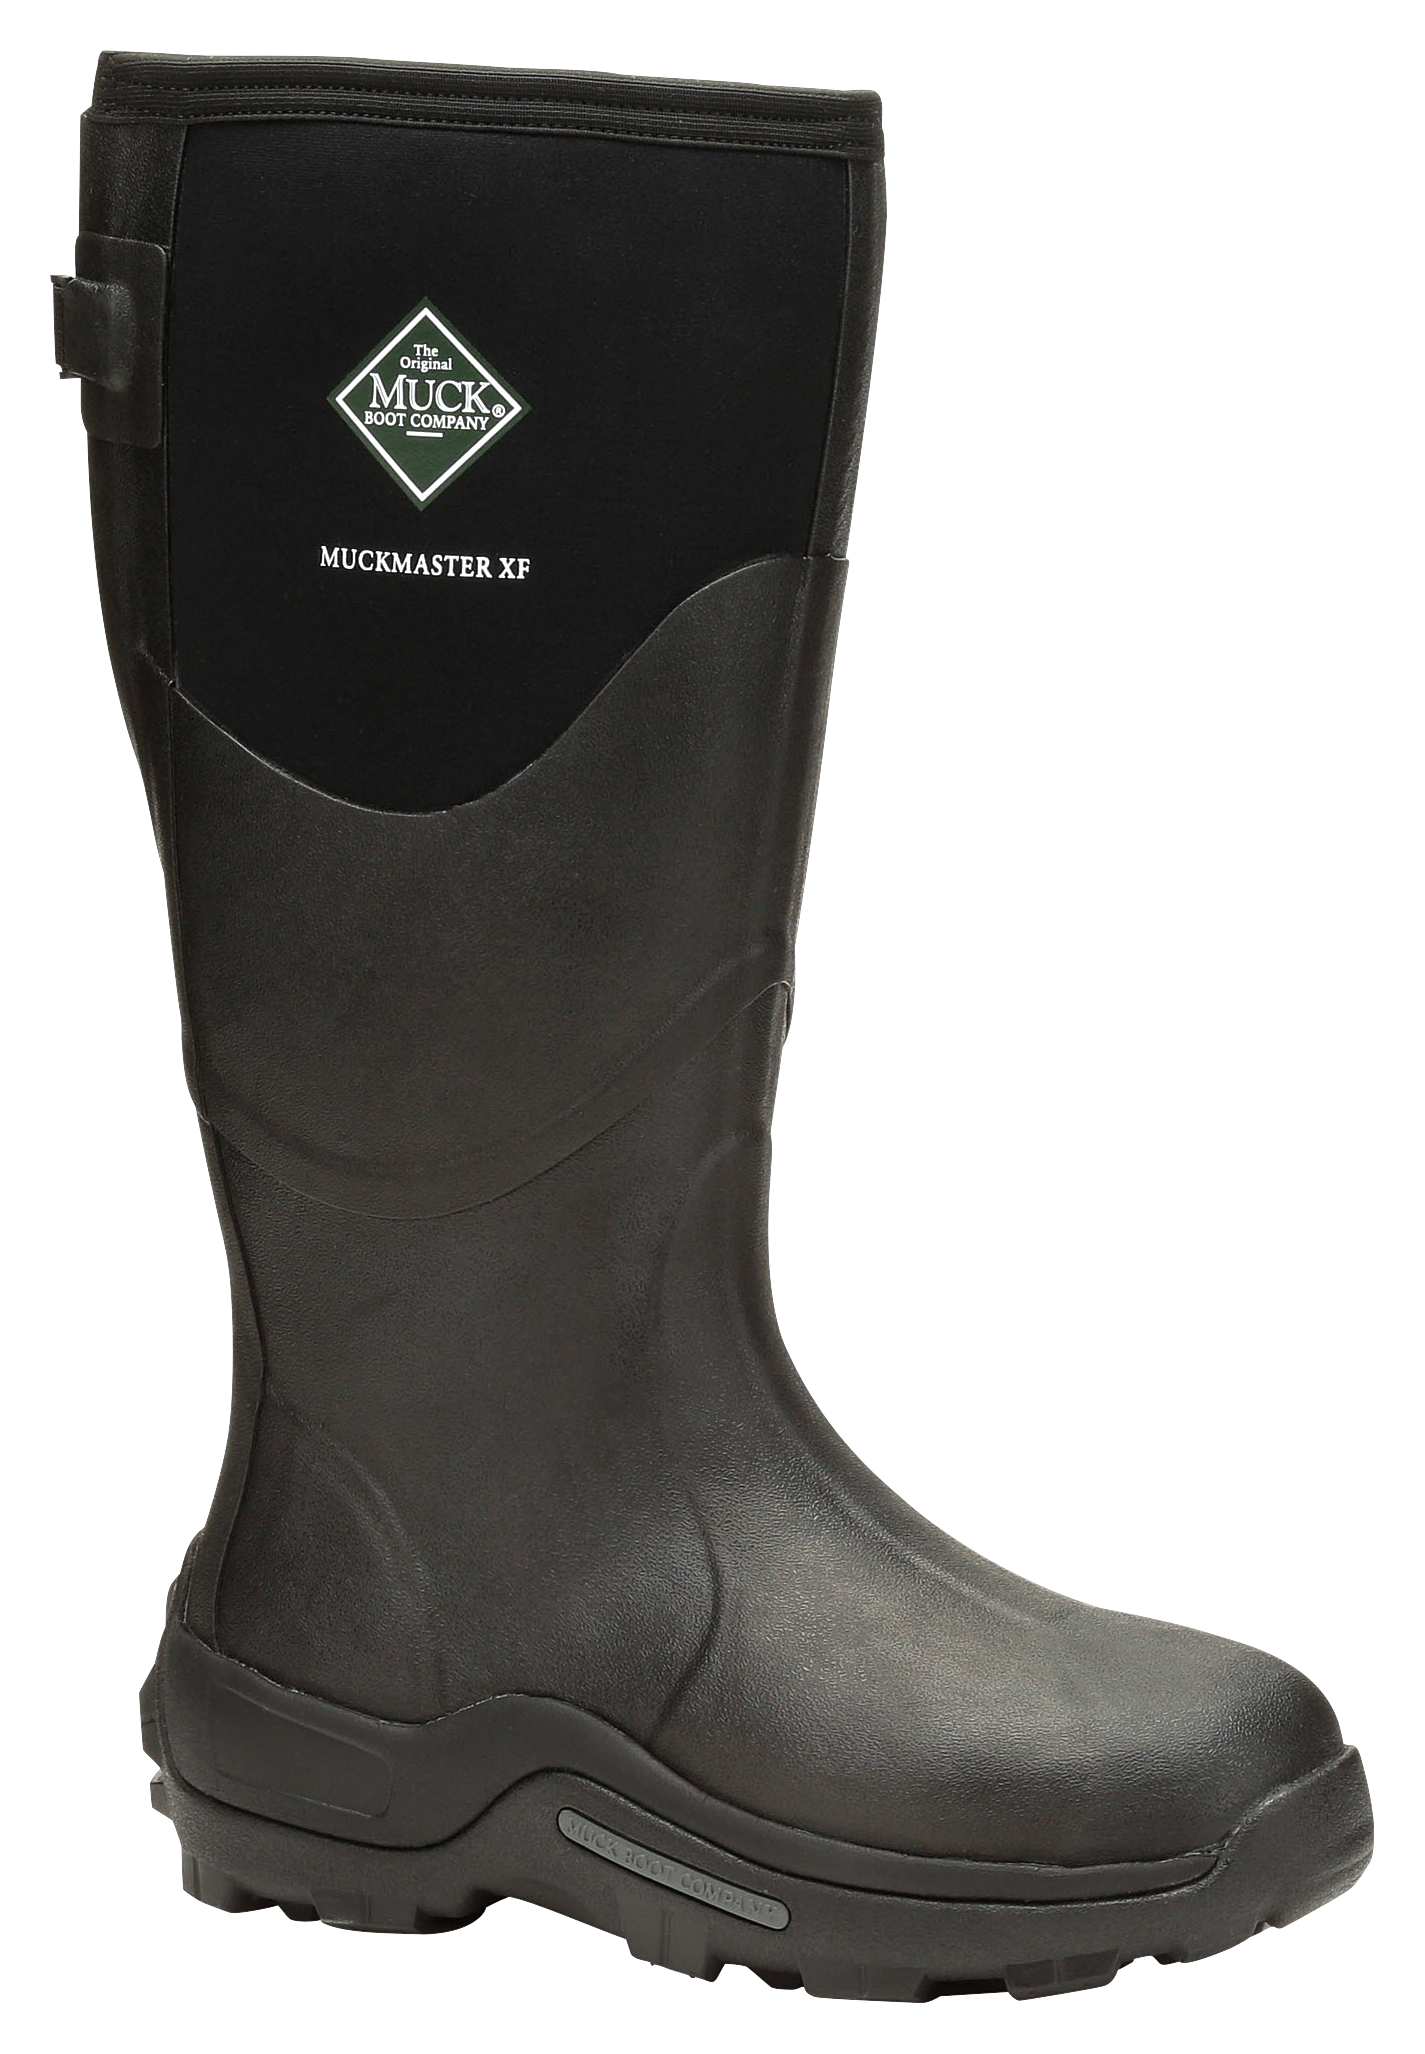 The Original Muck Boot Company Chore XF Waterproof Boots for Ladies ...